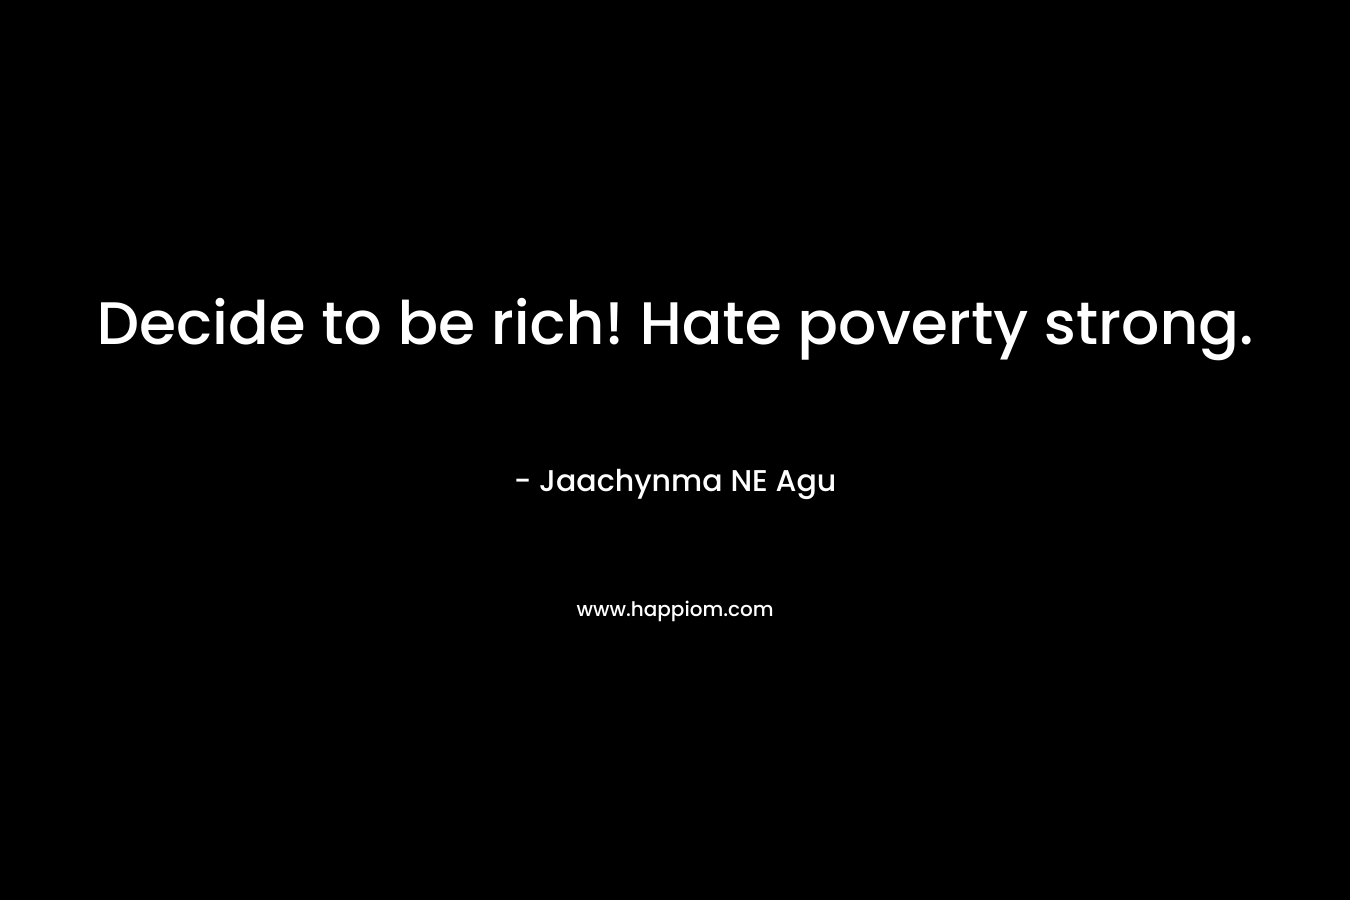 Decide to be rich! Hate poverty strong.